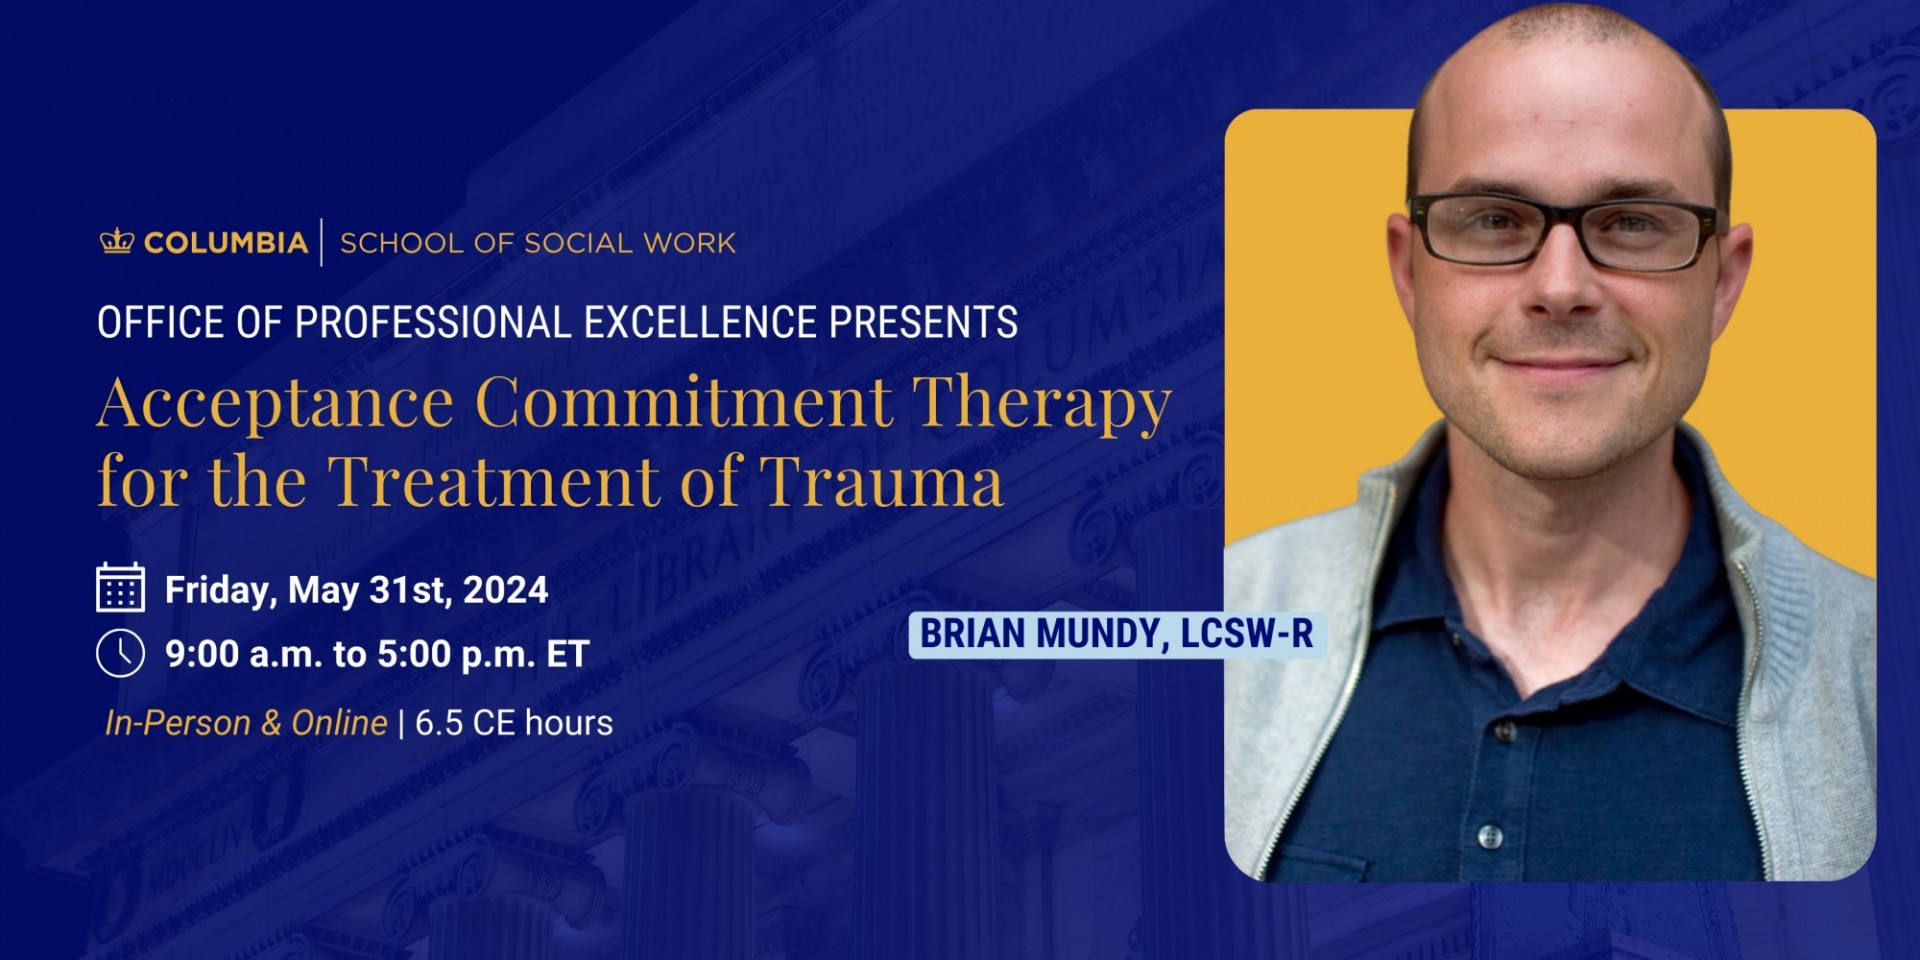 Acceptance Commitment Therapy for the Treatment of Trauma